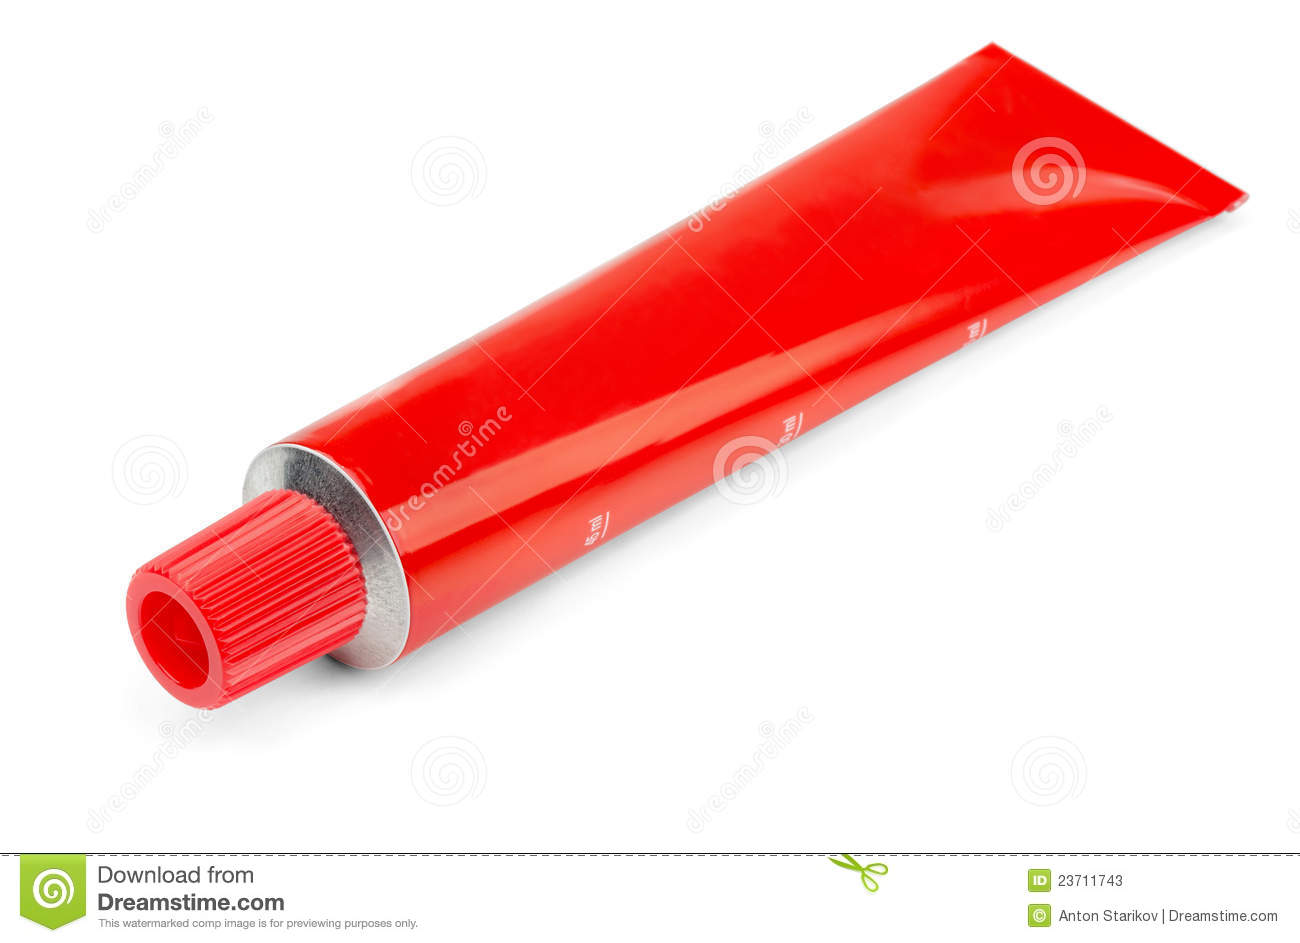 Ointment Tube Stock Photos   Image  23711743